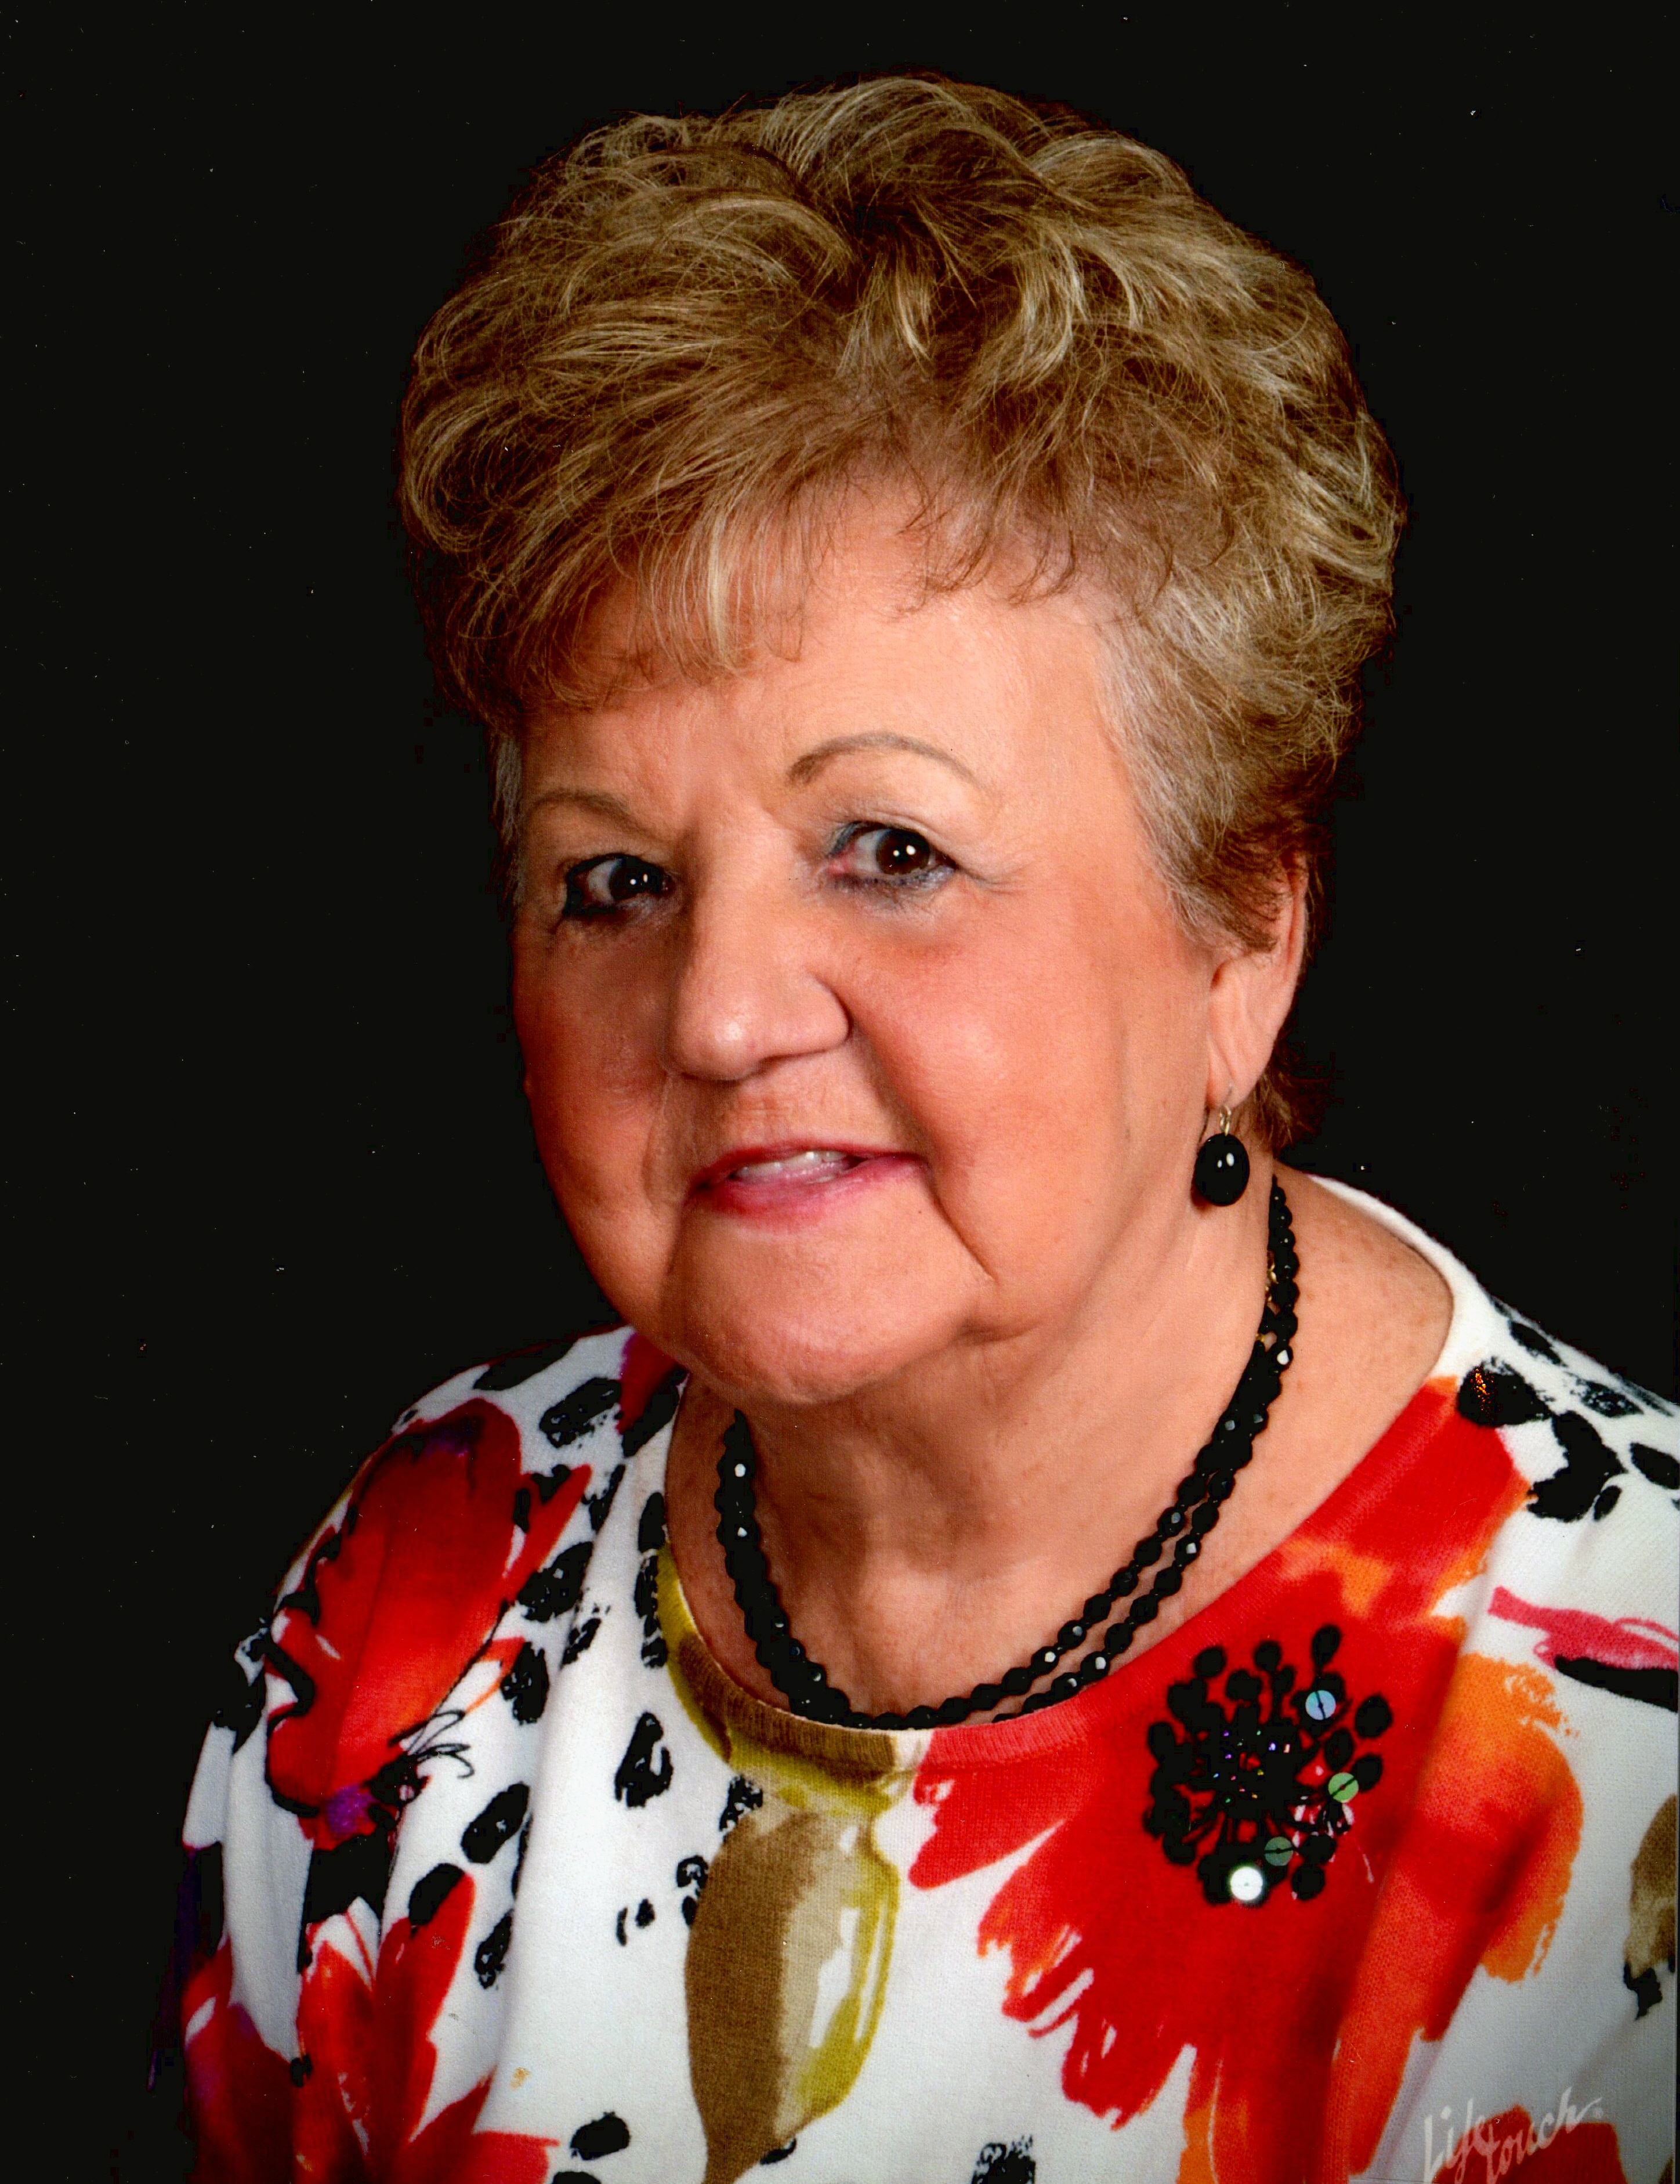 Obituary information for Pauline Bunny D. Hall